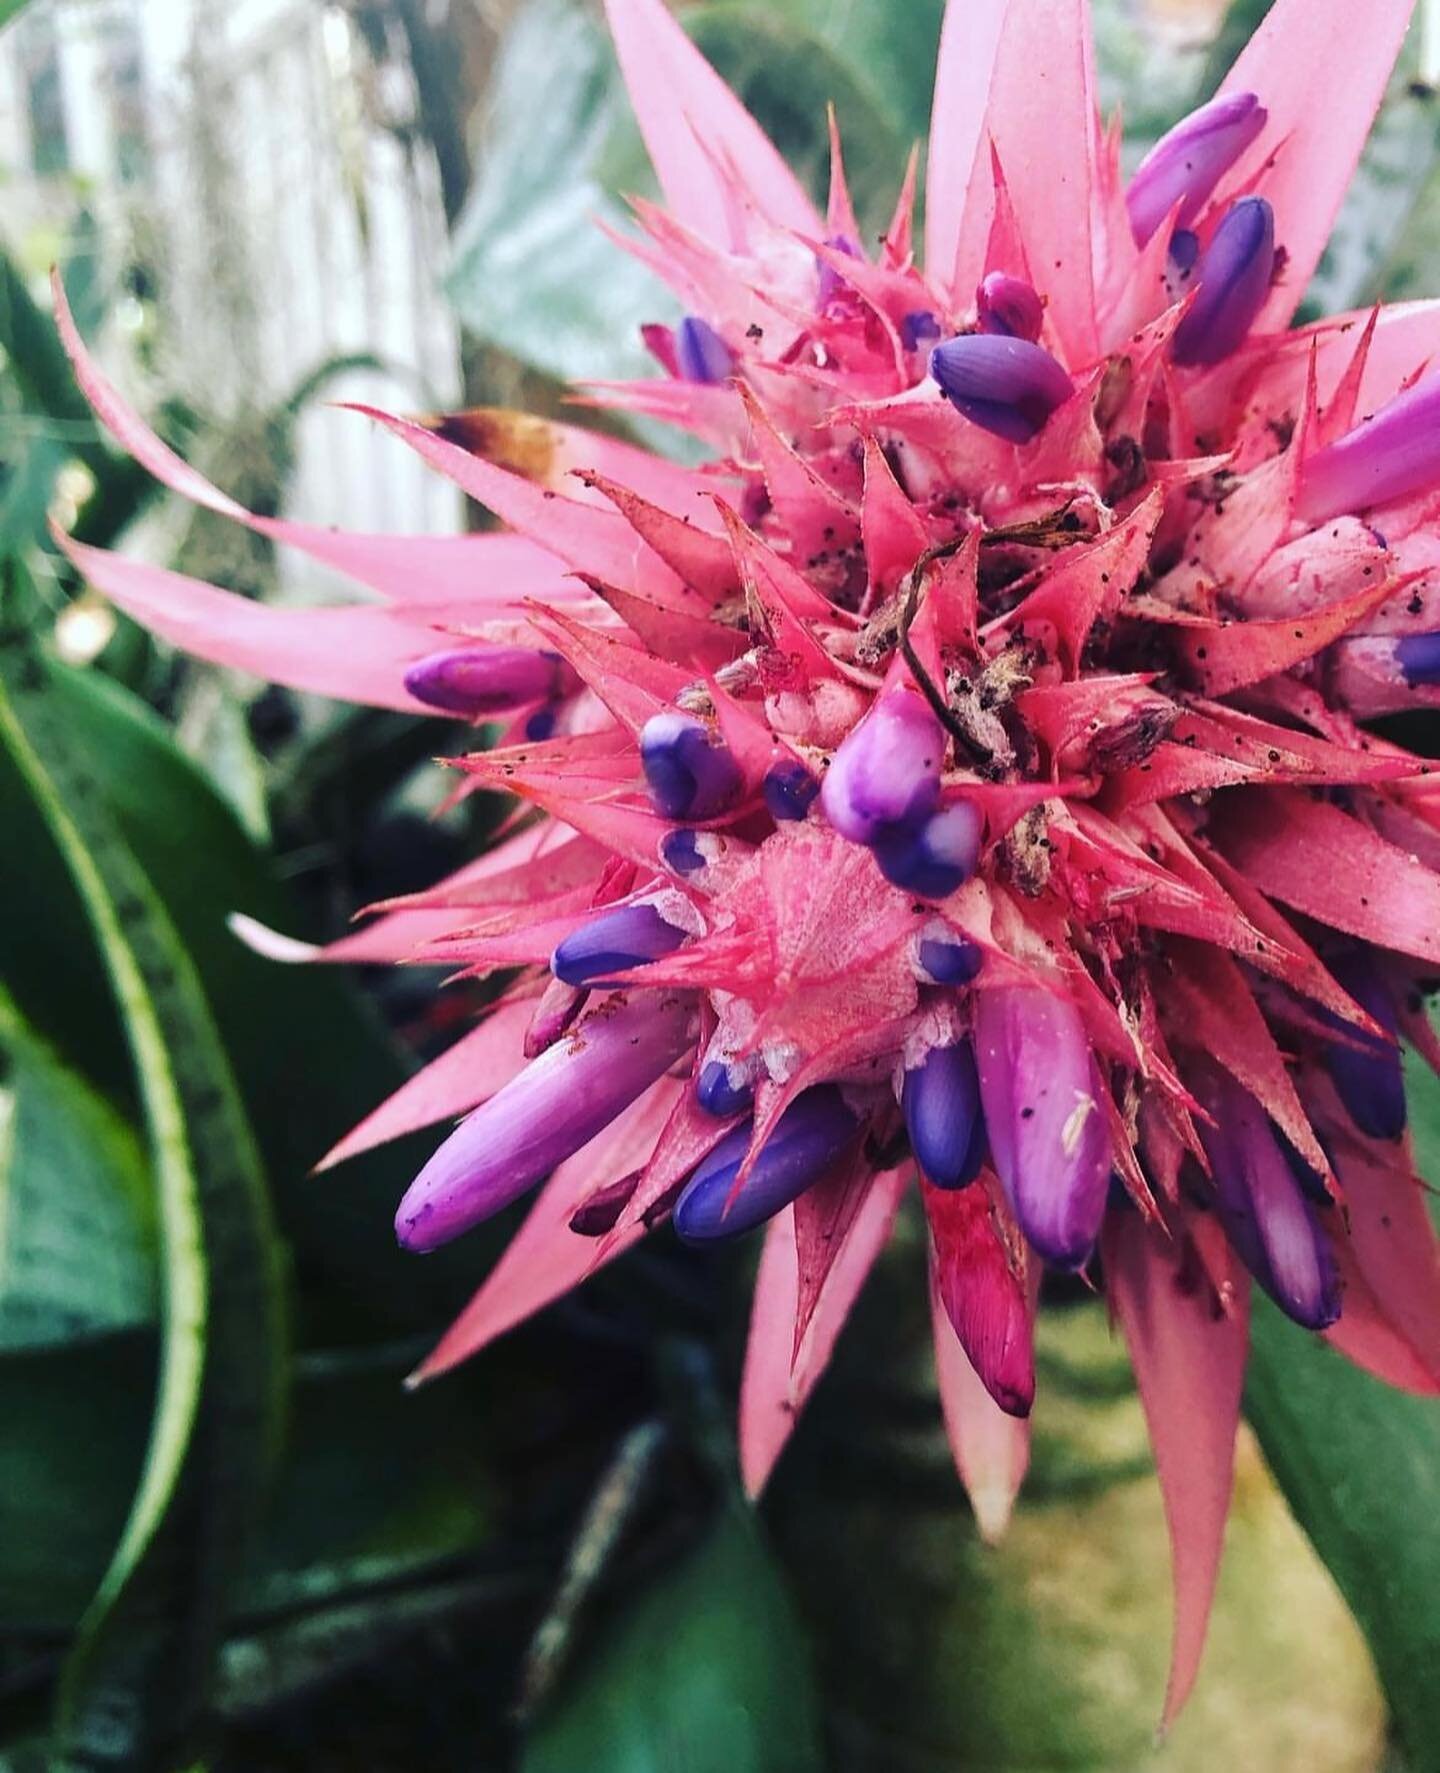 A beautiful respite. Take in the #orchids, #bromeliads and #tropicalginger with views of Magens, Tortola and St. John. With Curated VI coupon book, Phantasea is offering 20% off your entrance fee. 📷 @phantaseavi
.
.
.
.
#stthomas #caribbean #usvi #i